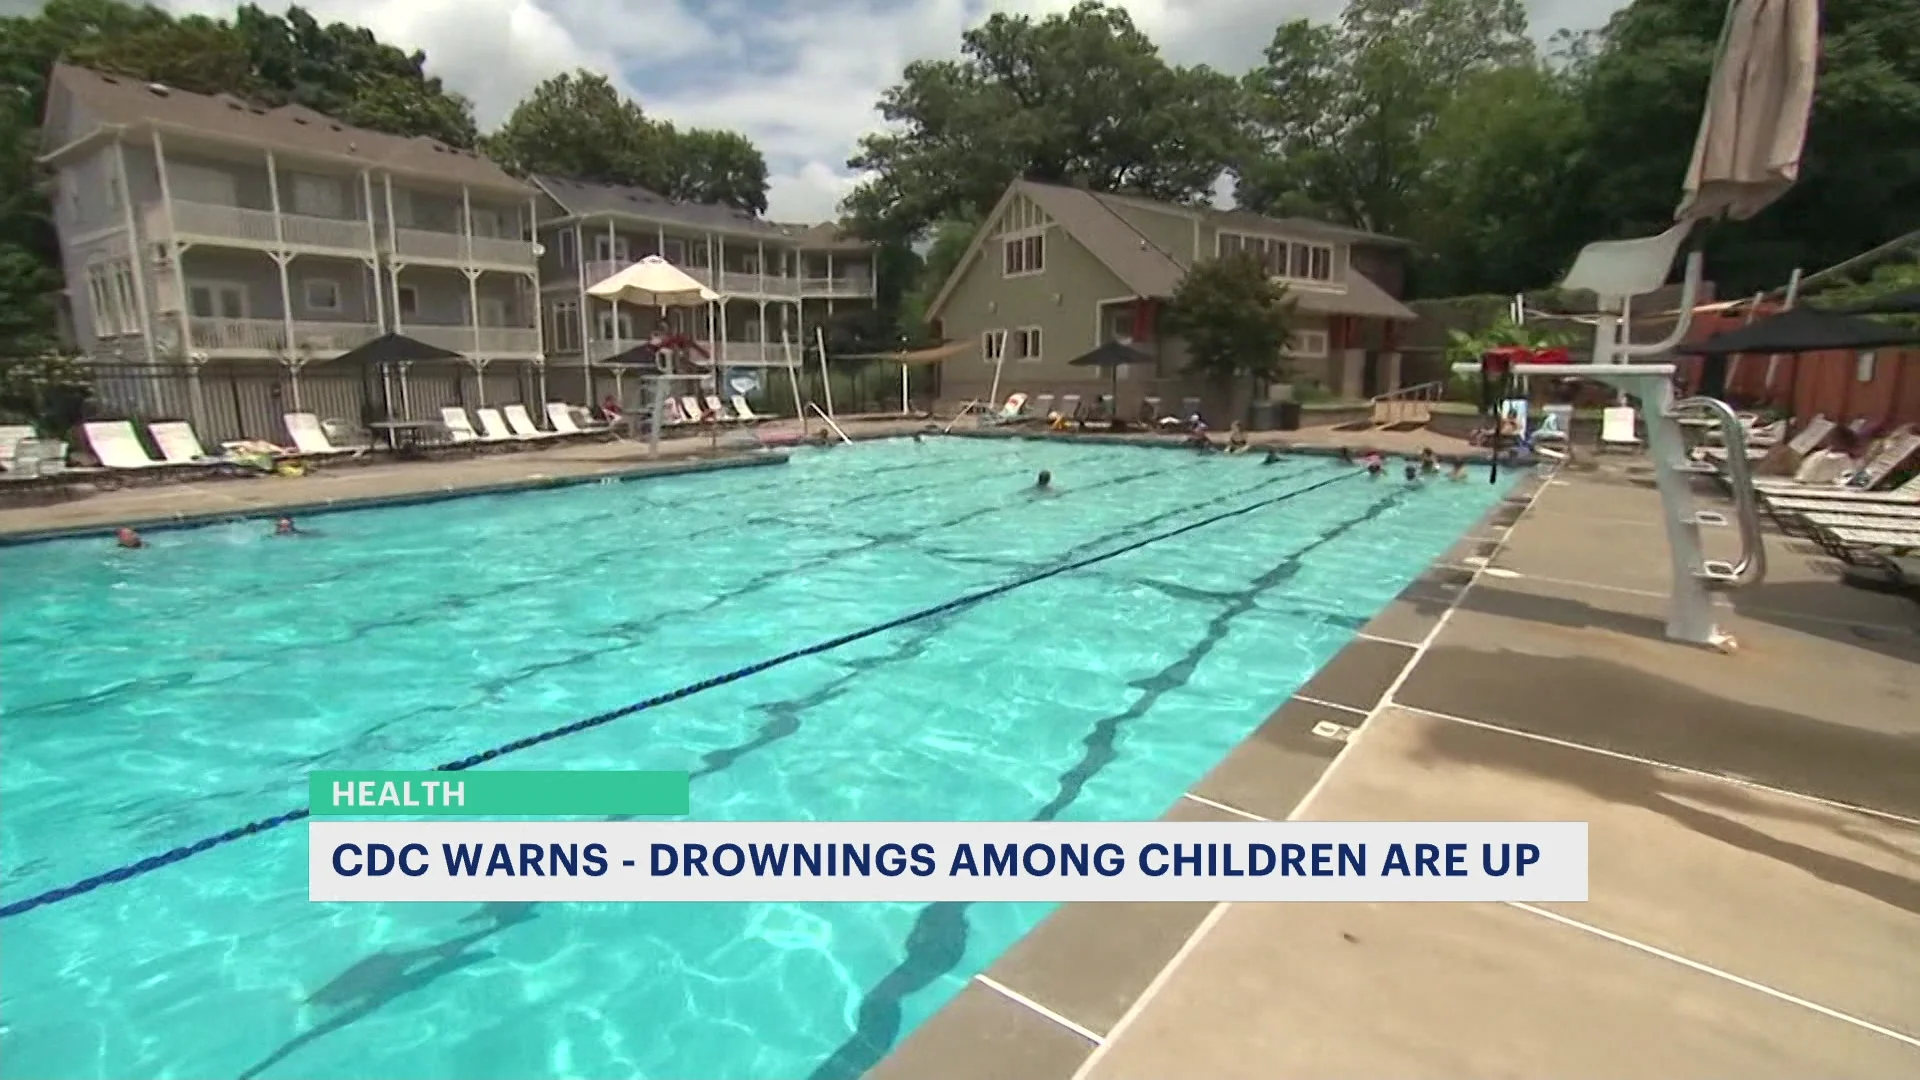  Missed swim lessons due to COVID-19 may be contributing to rise in child drownings